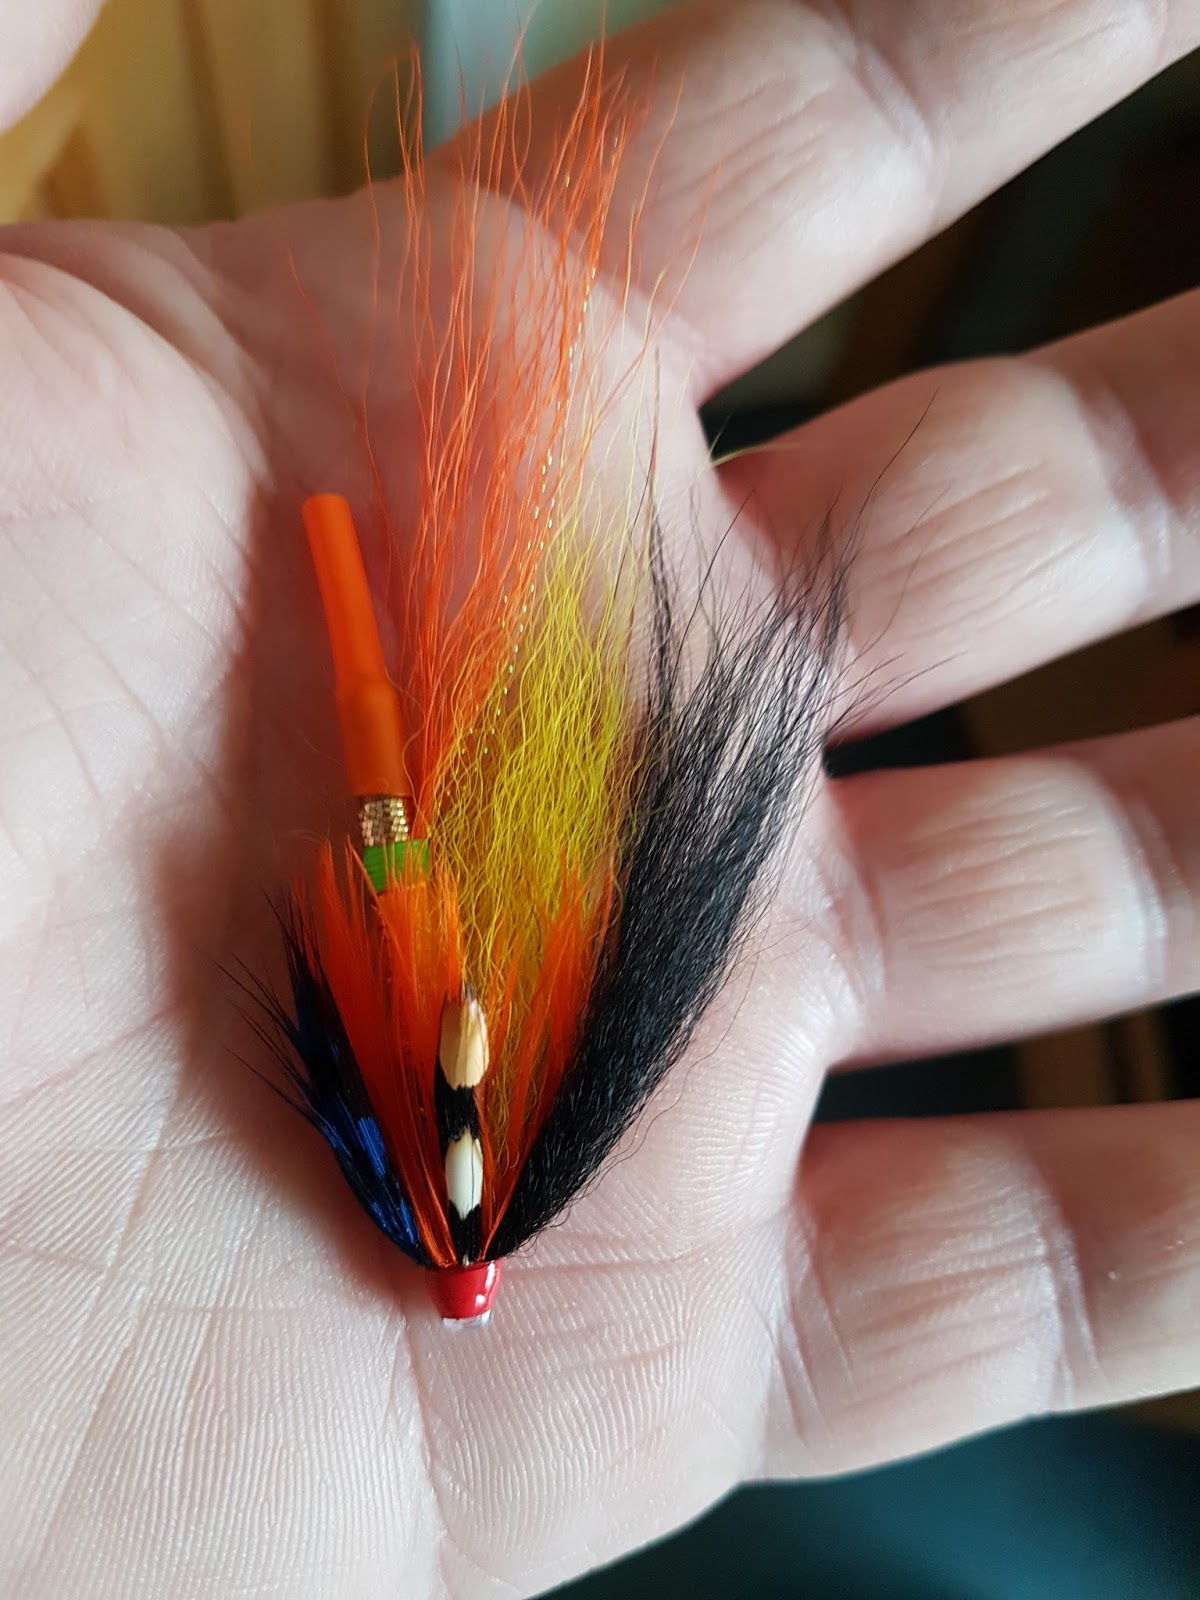 Salmon Fly: Spring Ghillie Copper Tube Salmon Fly - Tay Salmon Fly